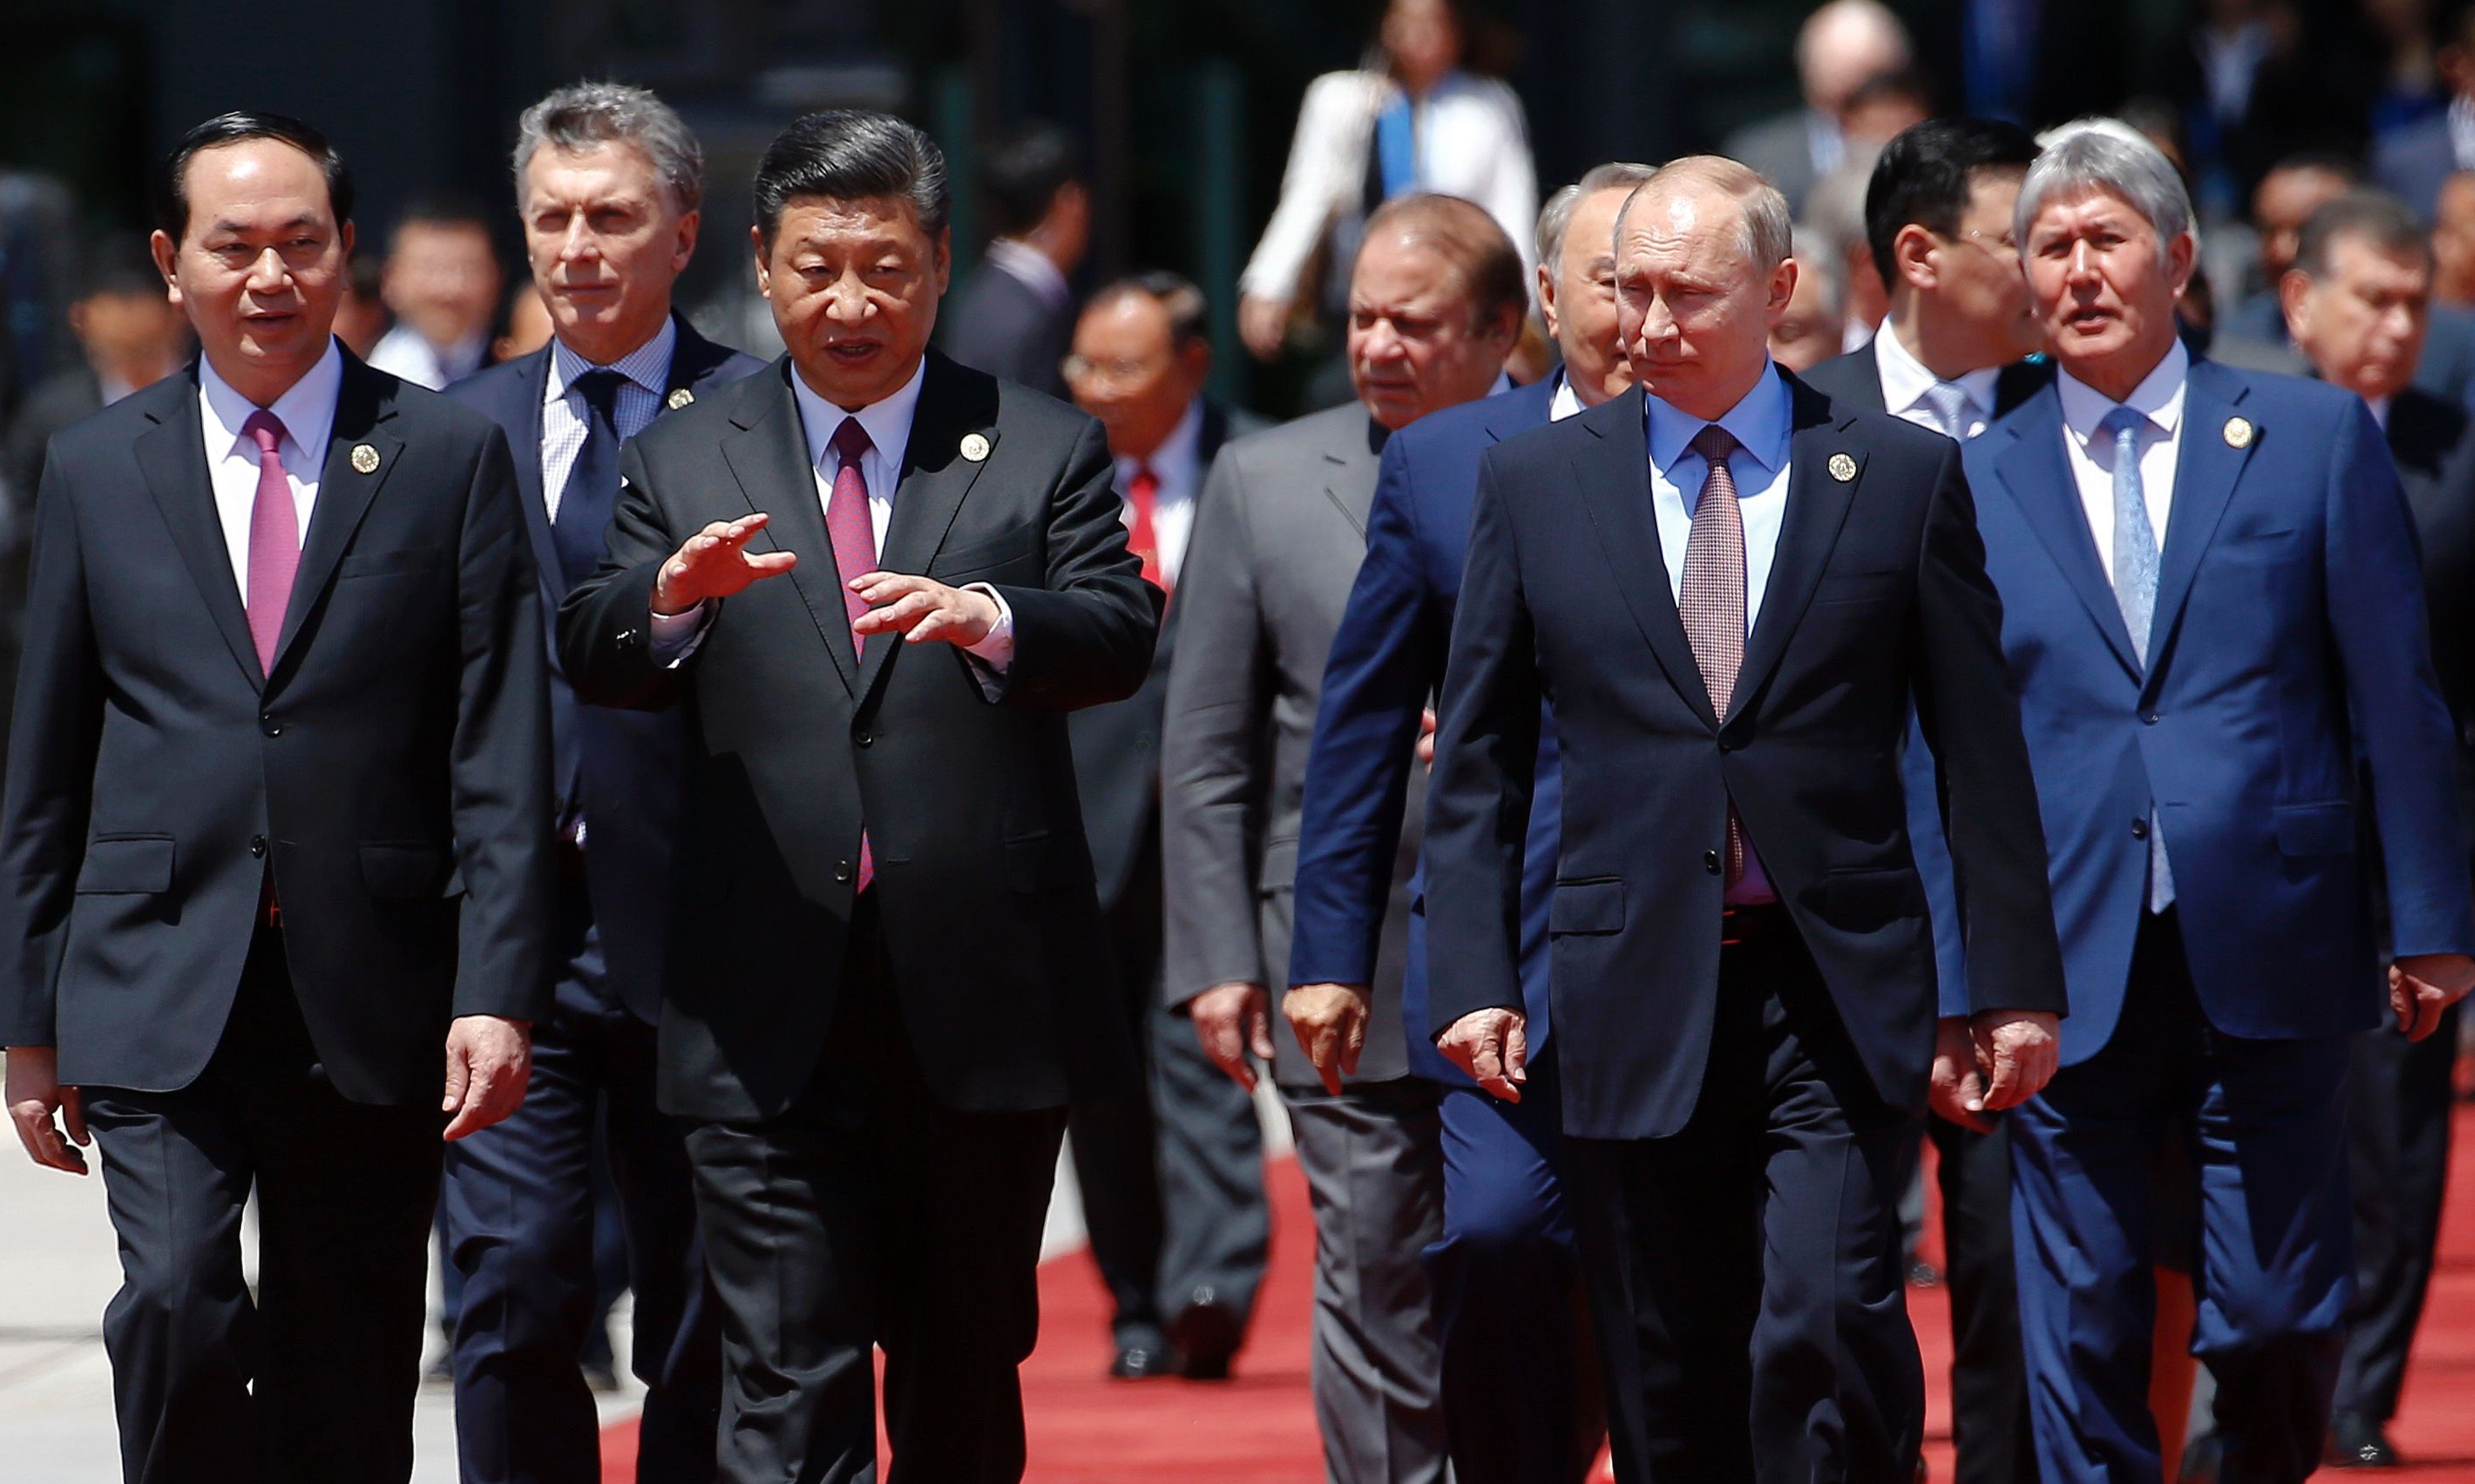 President Xi Jinping (second from left) walks with Vietnamese President Tran Dai Quang and Russian President Vladimir Putin to have a group photo at the International Conference Centre in Yanqi Lake, north of Beijing, yesterday. Photo: AFP